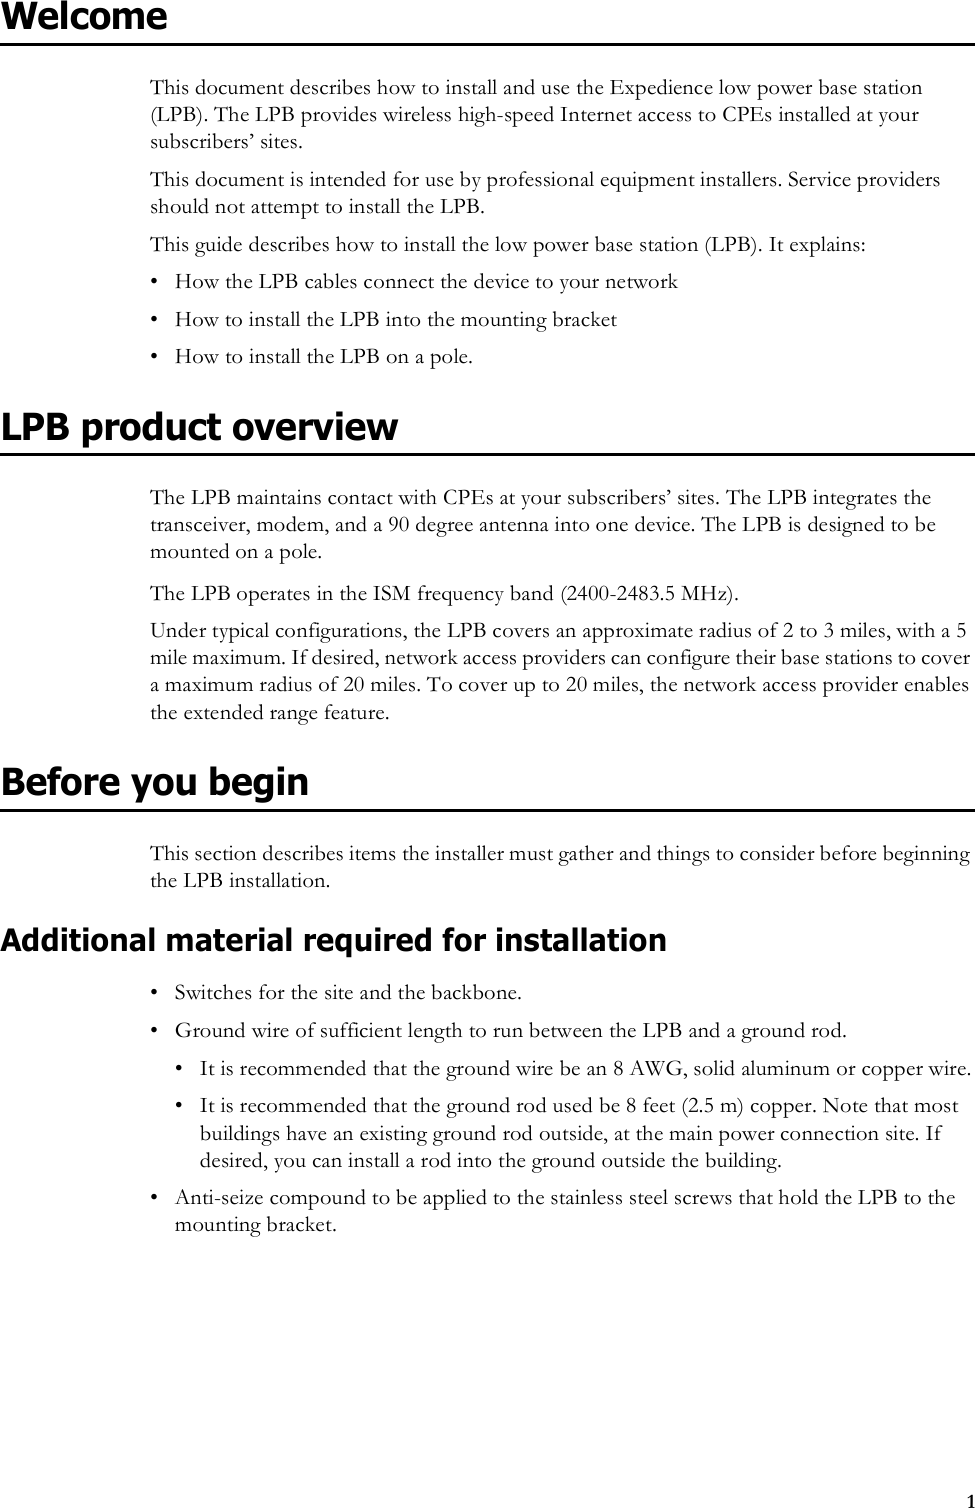 1WelcomeThis document describes how to install and use the Expedience low power base station (LPB). The LPB provides wireless high-speed Internet access to CPEs installed at your subscribers’ sites. This document is intended for use by professional equipment installers. Service providers should not attempt to install the LPB. This guide describes how to install the low power base station (LPB). It explains:• How the LPB cables connect the device to your network• How to install the LPB into the mounting bracket• How to install the LPB on a pole.LPB product overviewThe LPB maintains contact with CPEs at your subscribers’ sites. The LPB integrates the transceiver, modem, and a 90 degree antenna into one device. The LPB is designed to be mounted on a pole. The LPB operates in the ISM frequency band (2400-2483.5 MHz). Under typical configurations, the LPB covers an approximate radius of 2 to 3 miles, with a 5 mile maximum. If desired, network access providers can configure their base stations to cover a maximum radius of 20 miles. To cover up to 20 miles, the network access provider enables the extended range feature.Before you beginThis section describes items the installer must gather and things to consider before beginning the LPB installation.Additional material required for installation• Switches for the site and the backbone.• Ground wire of sufficient length to run between the LPB and a ground rod.• It is recommended that the ground wire be an 8 AWG, solid aluminum or copper wire.• It is recommended that the ground rod used be 8 feet (2.5 m) copper. Note that most buildings have an existing ground rod outside, at the main power connection site. If desired, you can install a rod into the ground outside the building. • Anti-seize compound to be applied to the stainless steel screws that hold the LPB to the mounting bracket.